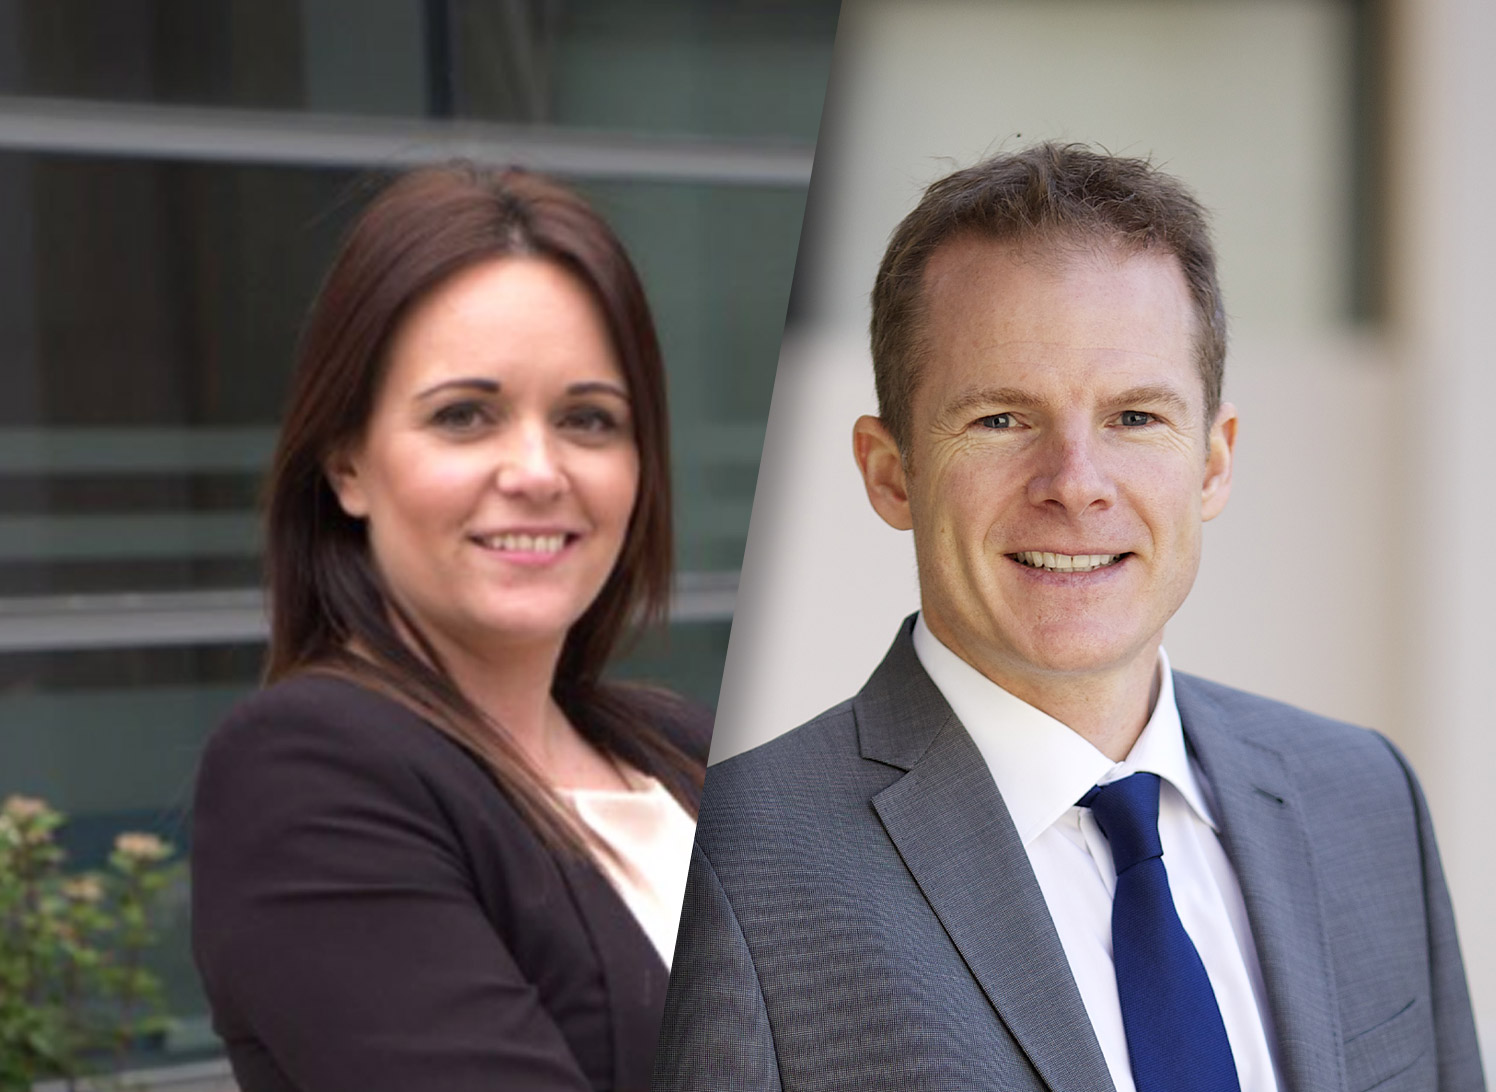 New business development appointments, Cindy Jacobs and Andy Jarrett